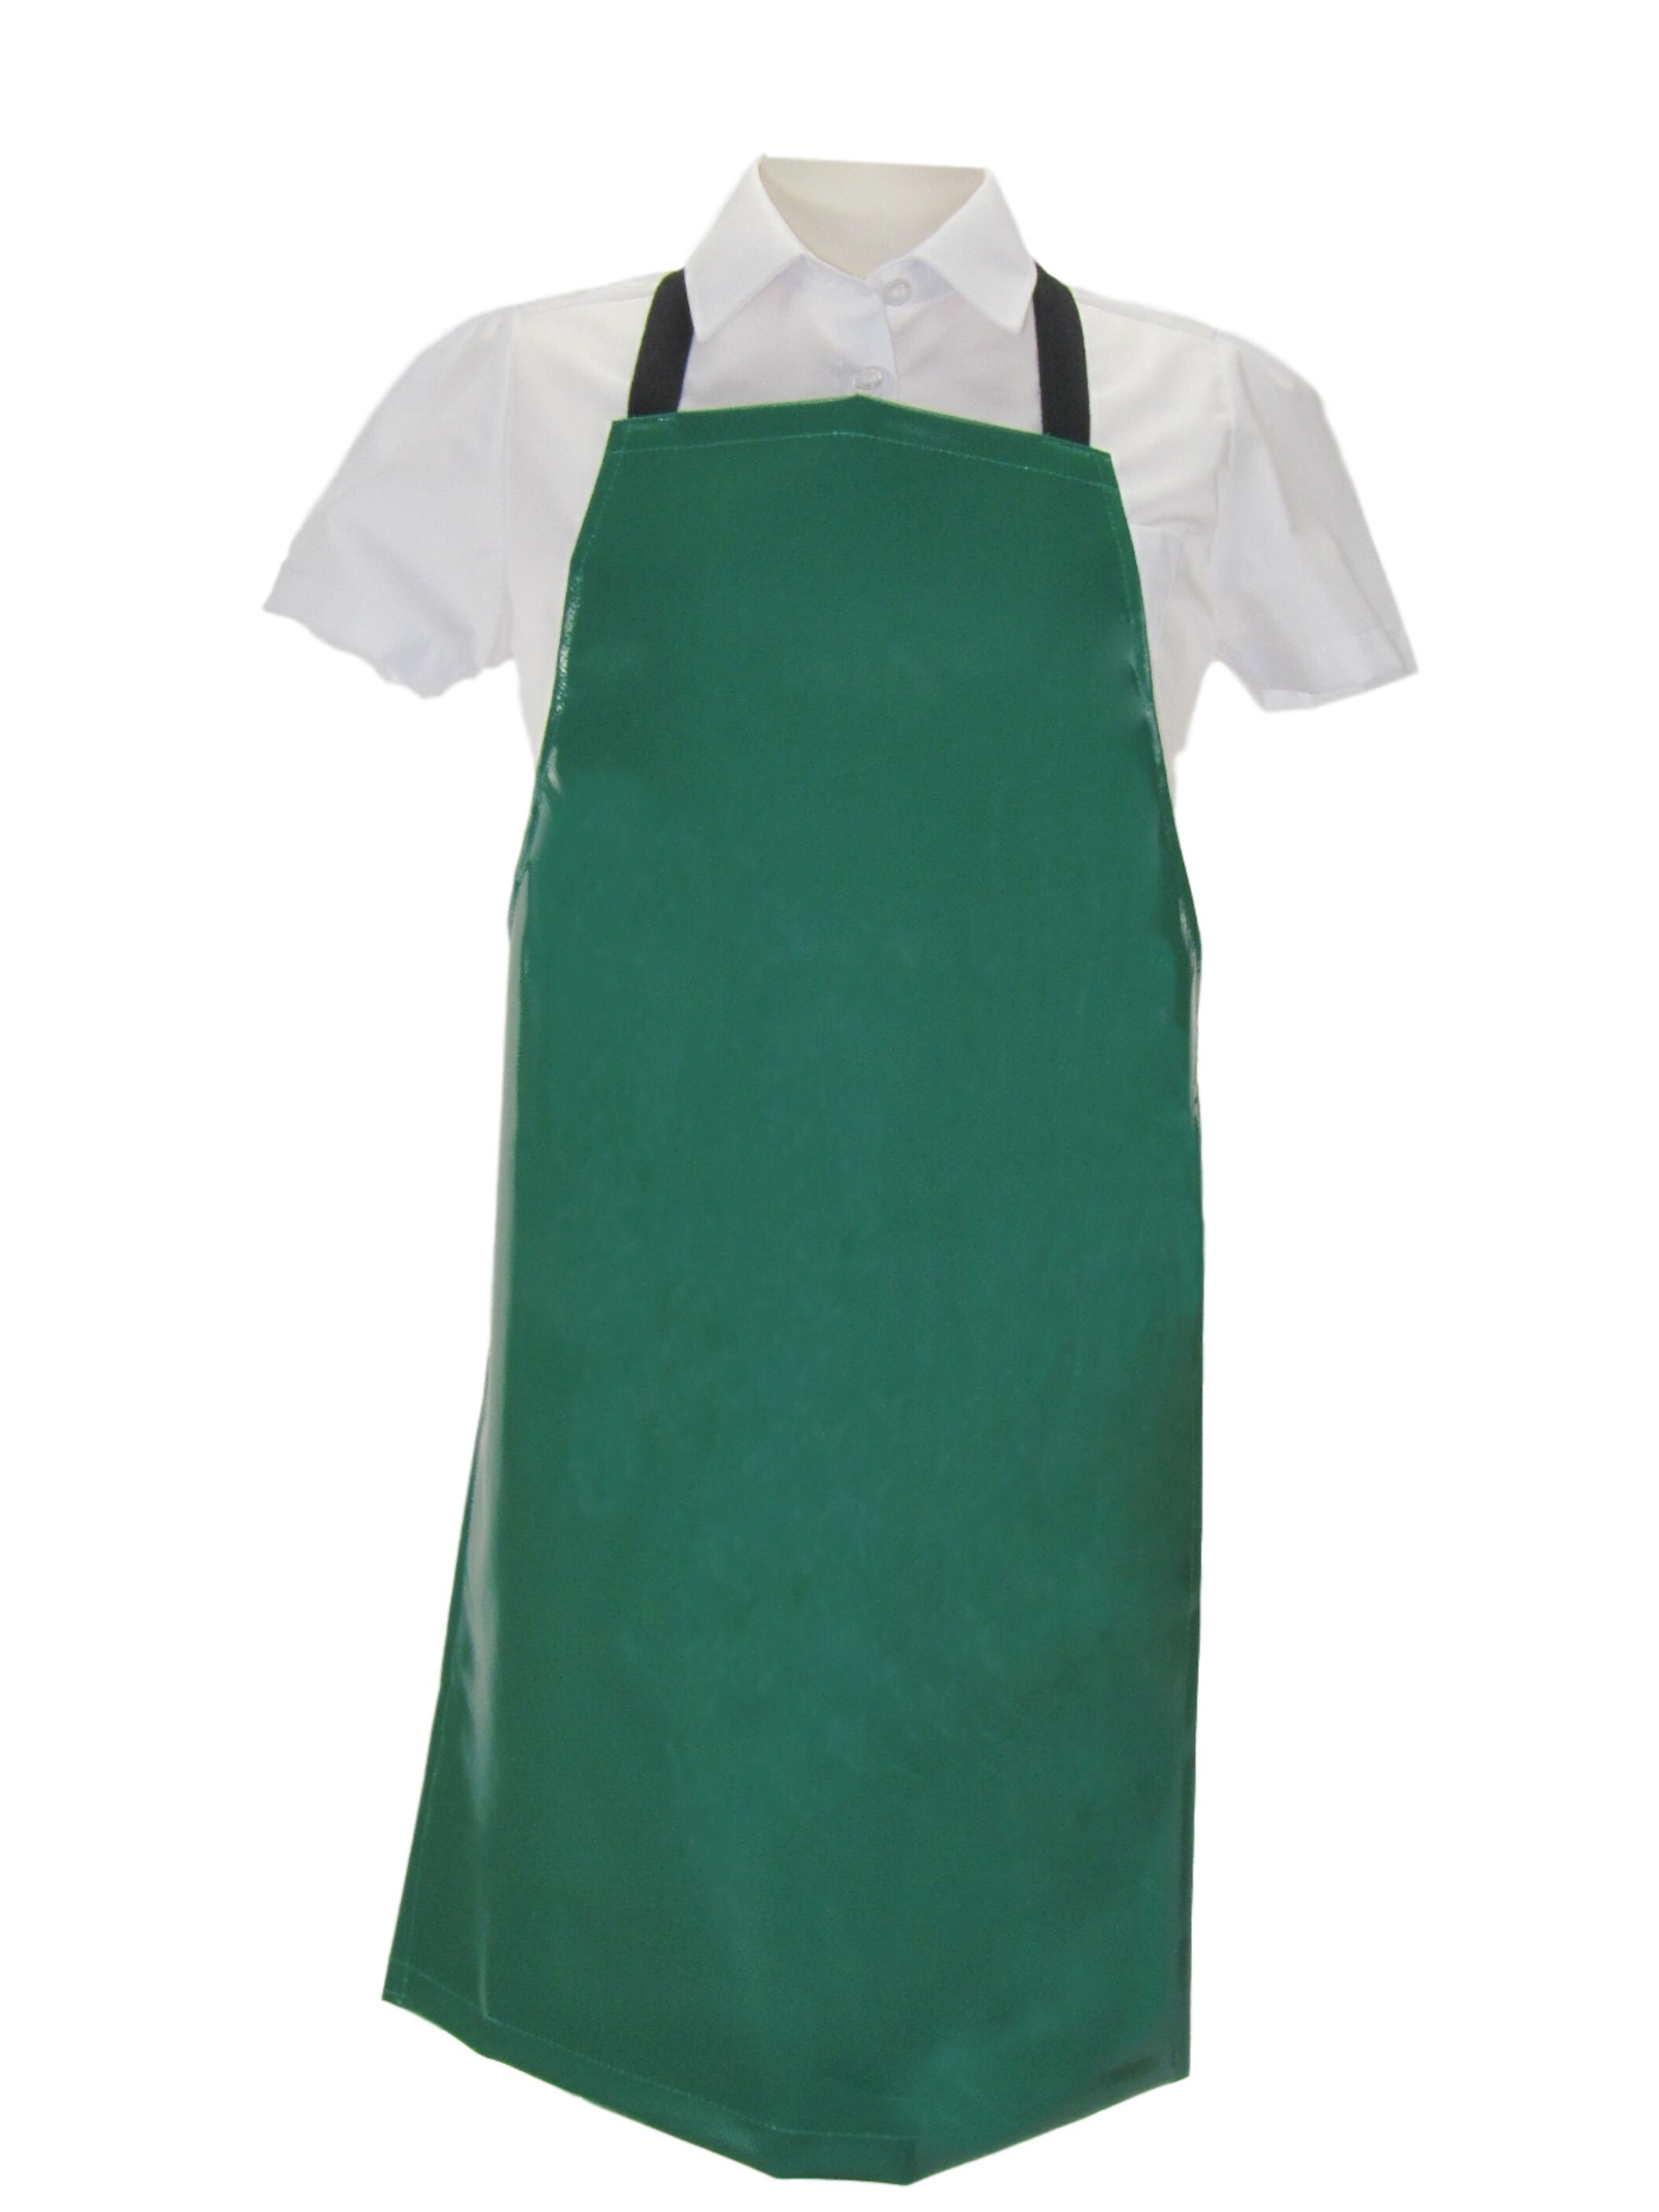 Waterproof Aprons Fits All White for Barber Cafe Food FREE Delivery NHS Apron 